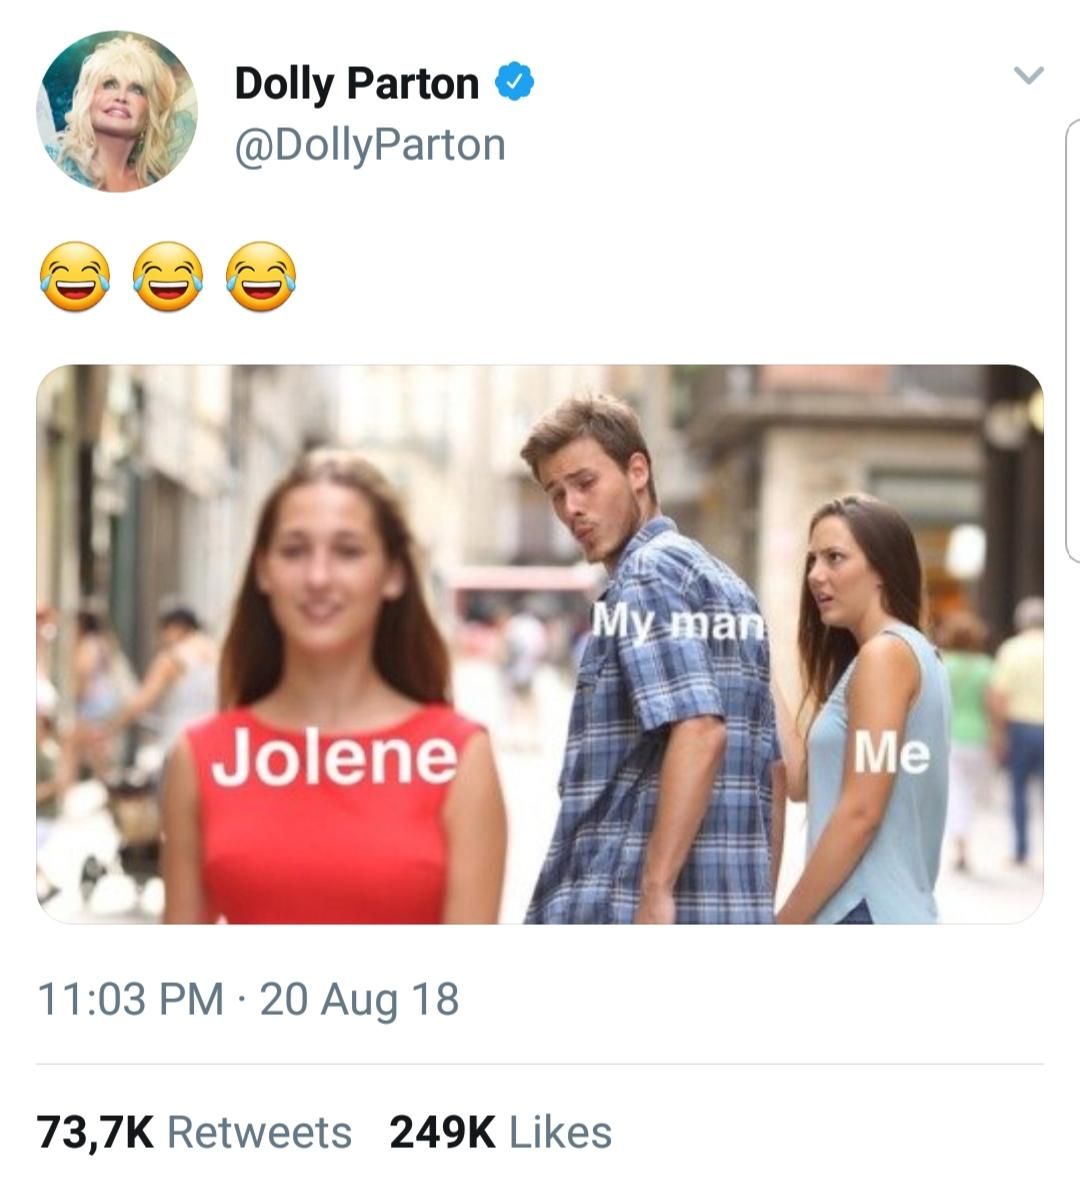 Dolly is up to date on the memes!